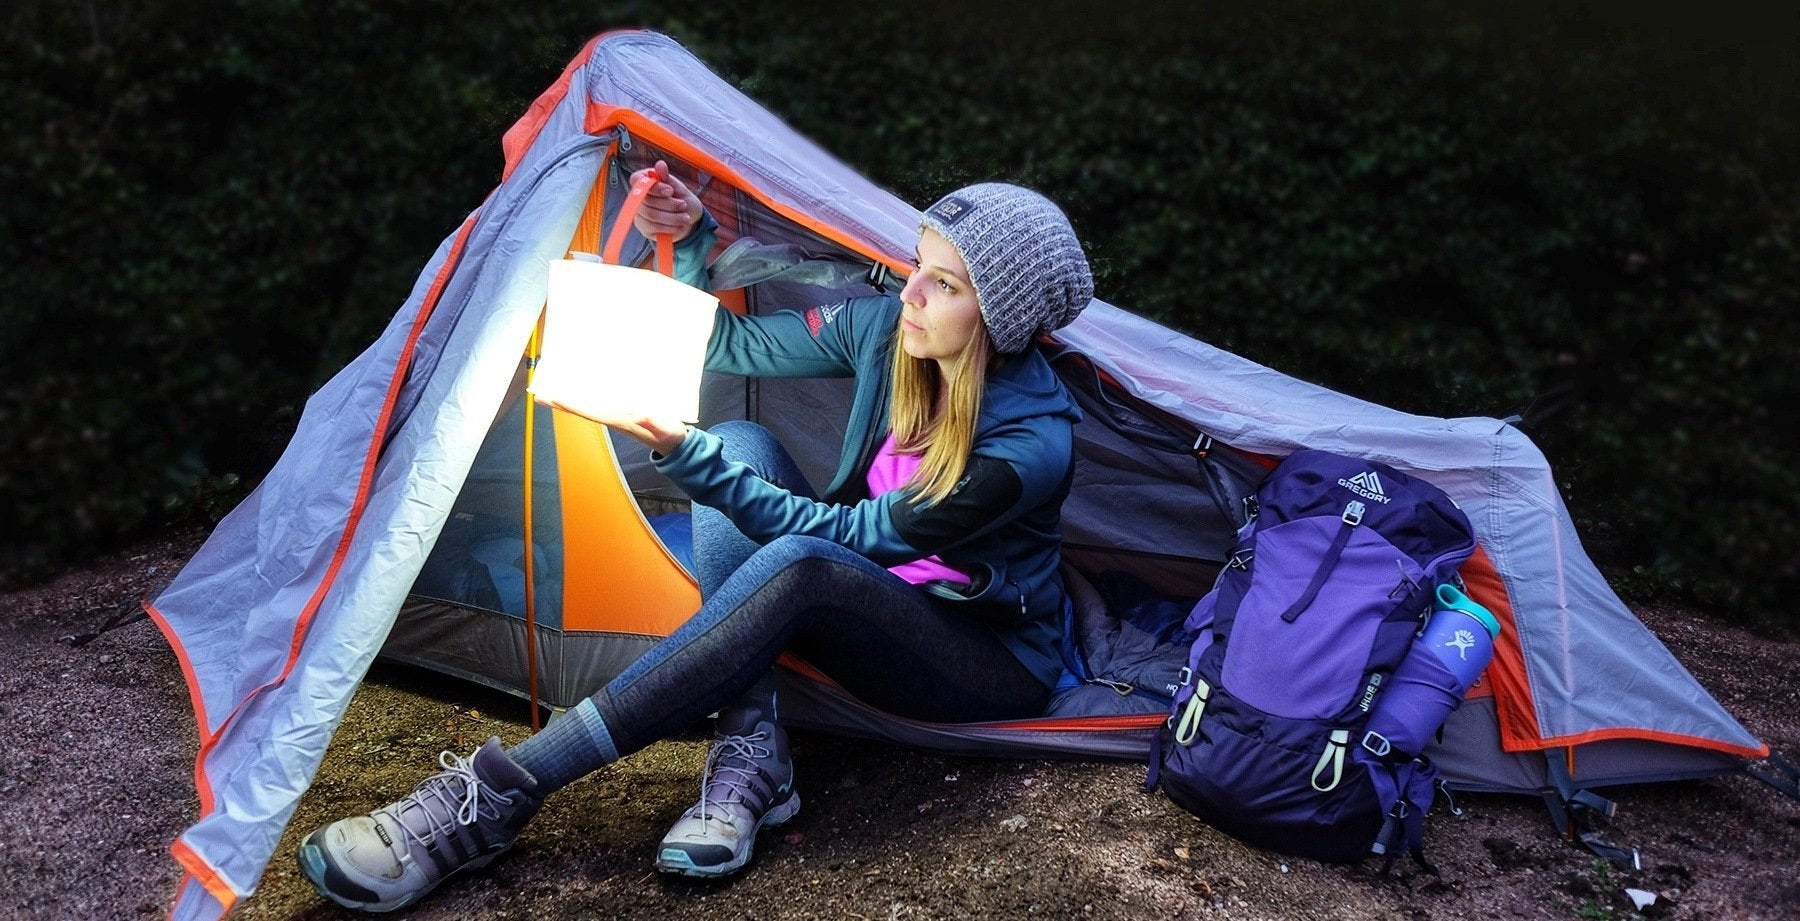 The 2019 Best Backpacking Lantern According to REI.com